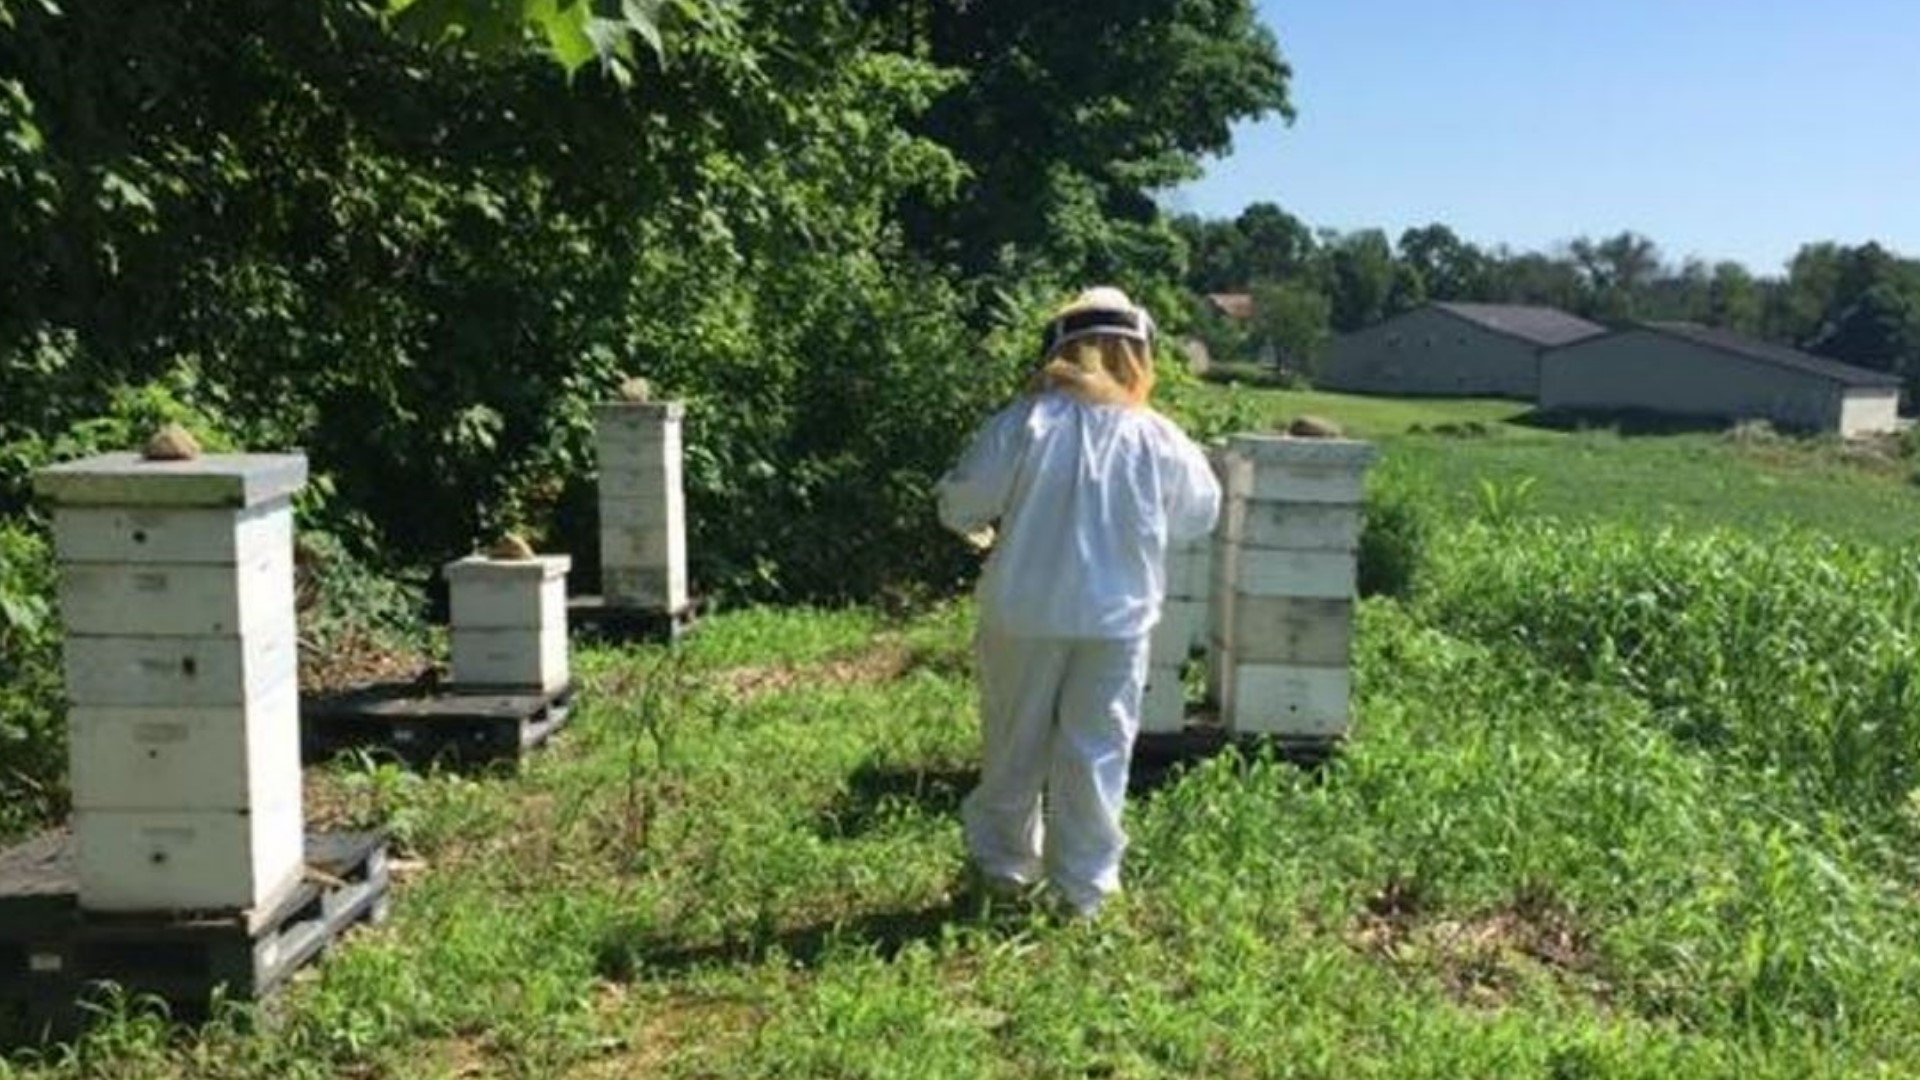 Steve Davis, the owner of Hilltop Honey Farm in East Palestine, says since the train derailment earlier this month, half of his bee colonies have dropped dead.